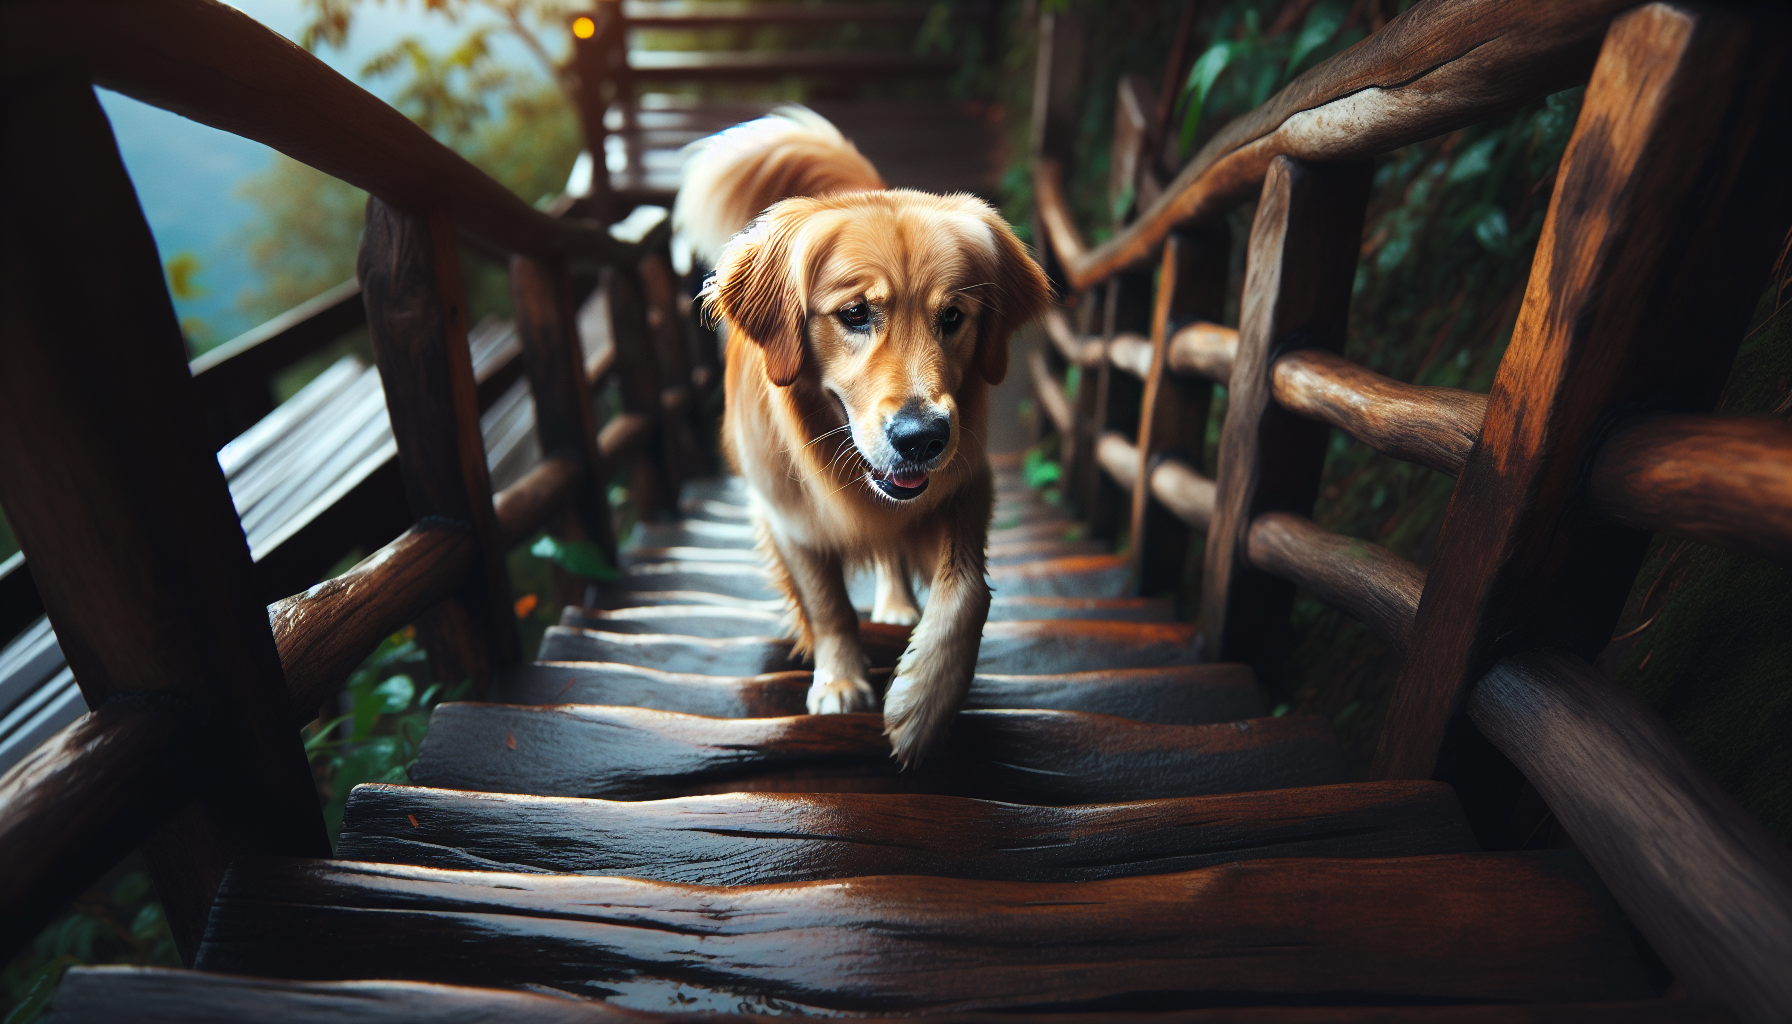 A dog cautiously navigating down wooden slippery stairs